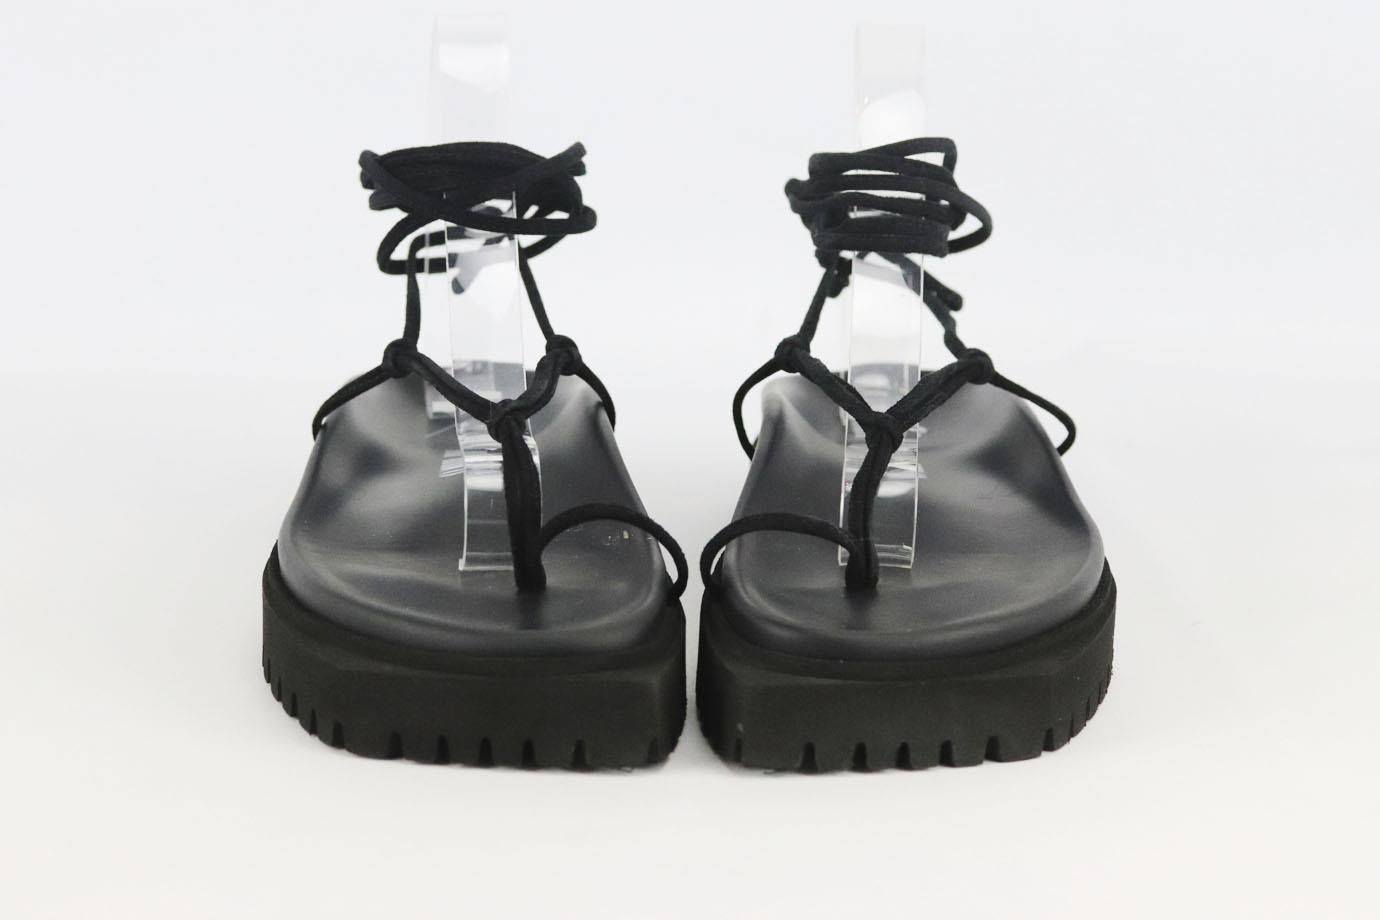 The Attico suede platform sandals. Black. Lace up fastening at side. Comes with dustbag. Size: EU 39 (UK 6, US 9). Insole: 9.6 in. Heel: 1 in Very good condition - Light wear to soles and upper material; see pictures.
